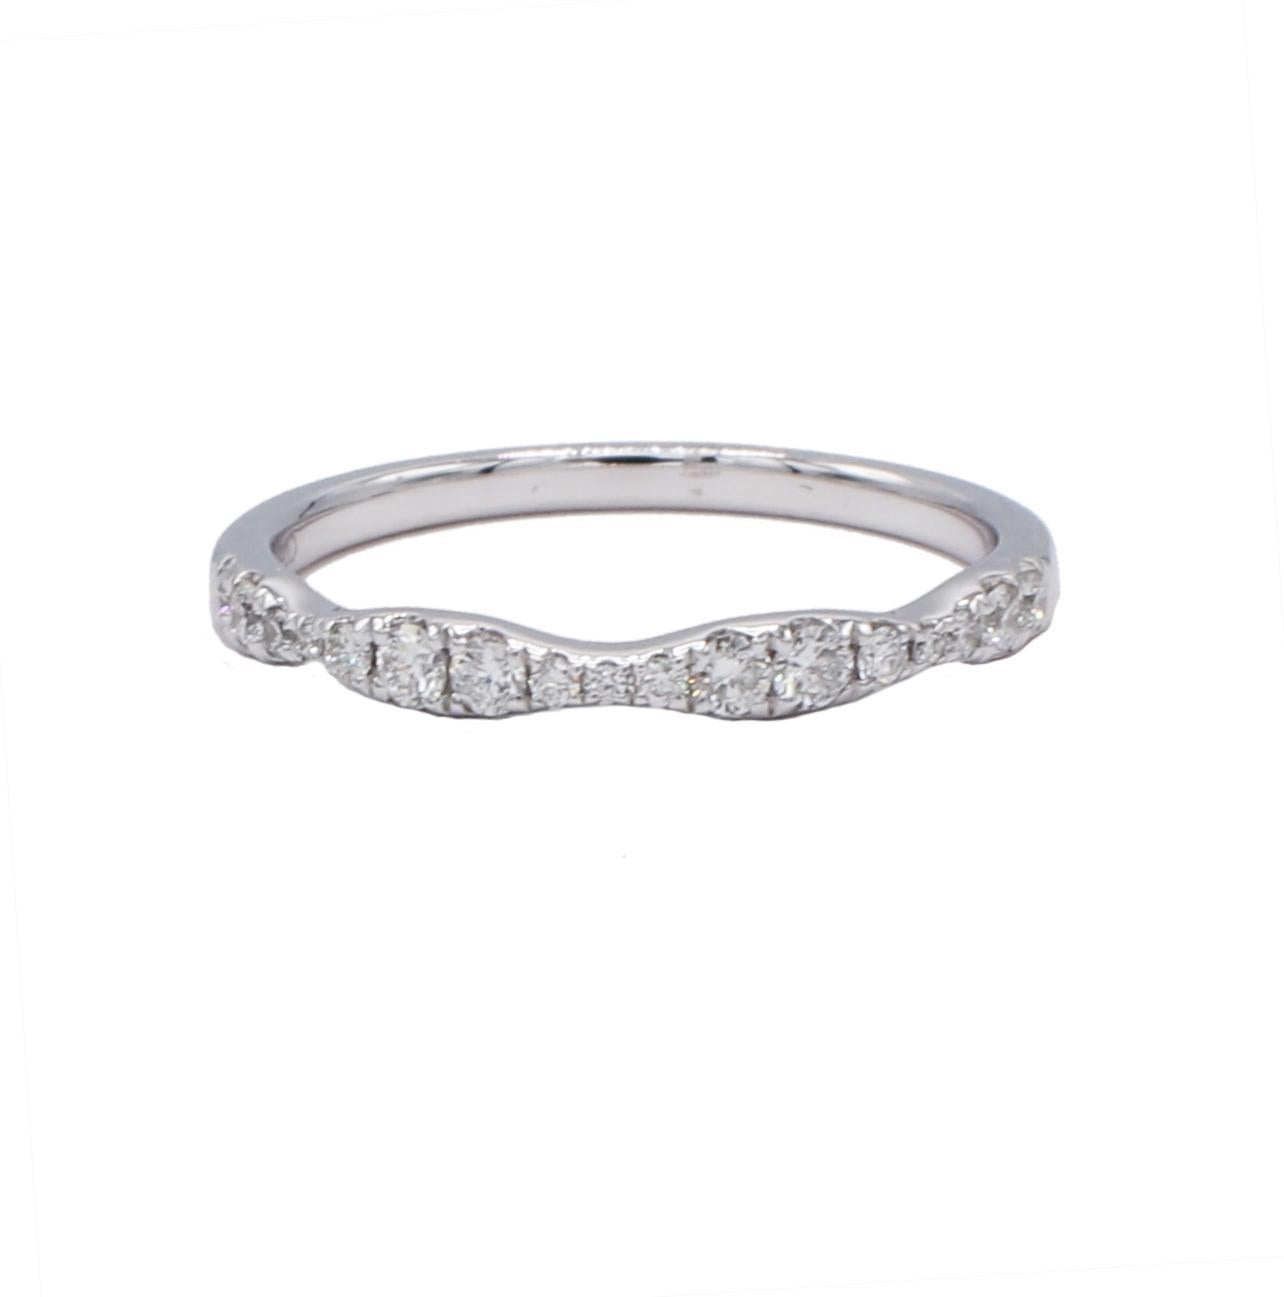 14K White Gold Natural Diamond Wavy Wedding Band 2.25mm Ring Size 6
Metal: 14K White Gold 585
Weight: 1.55 grams
27 round natural diamonds measuring approx. .233 ctw G-H SI
Markings: Stamped 